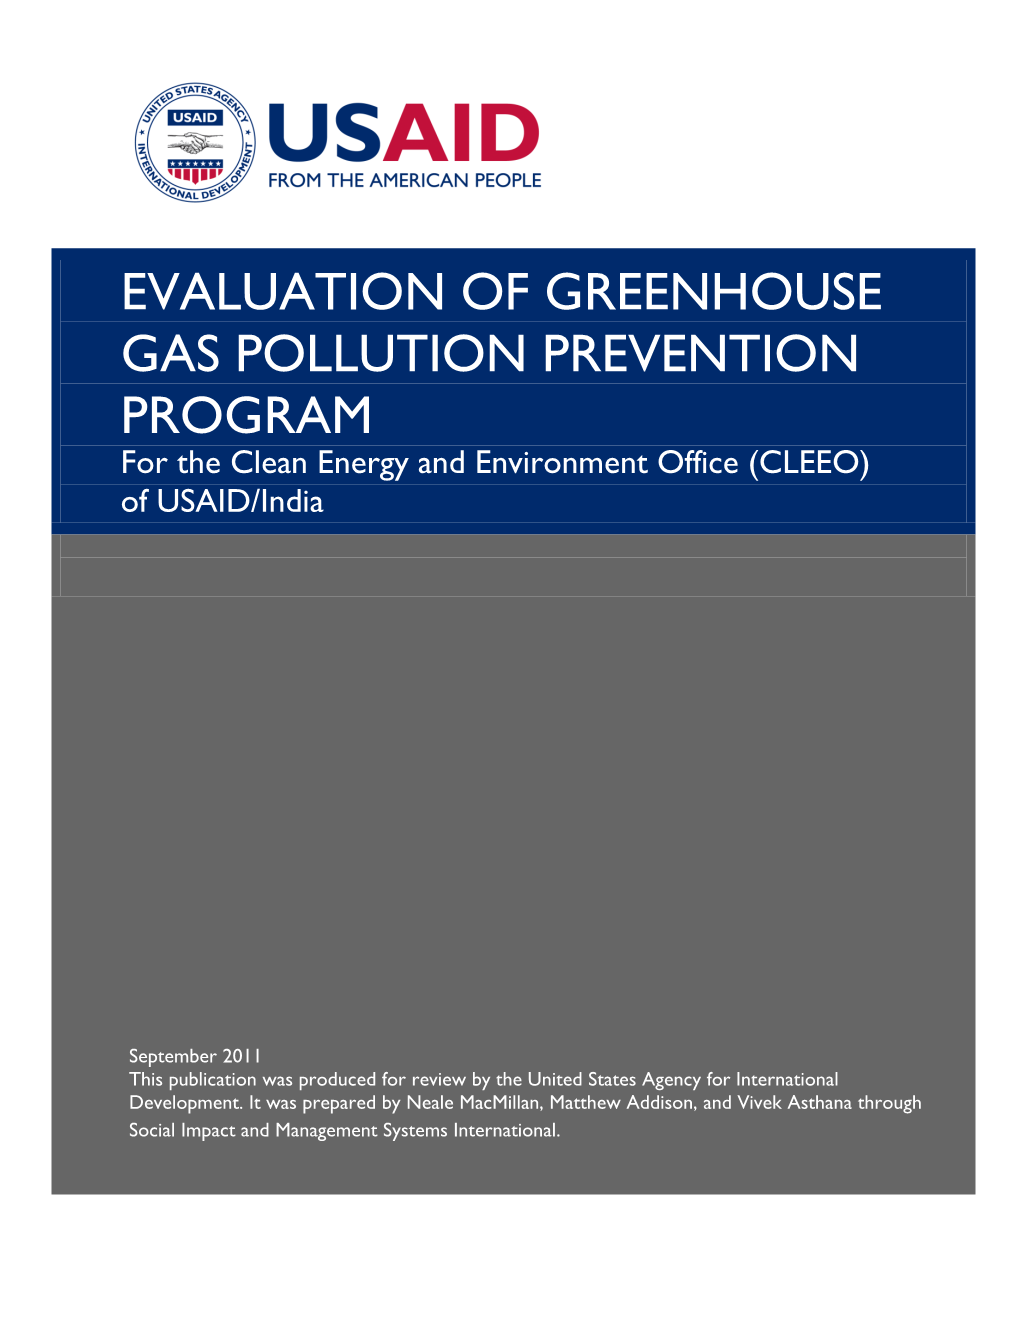 EVALUATION of GREENHOUSE GAS POLLUTION PREVENTION PROGRAM for the Clean Energy and Environment Office (CLEEO) of USAID/India